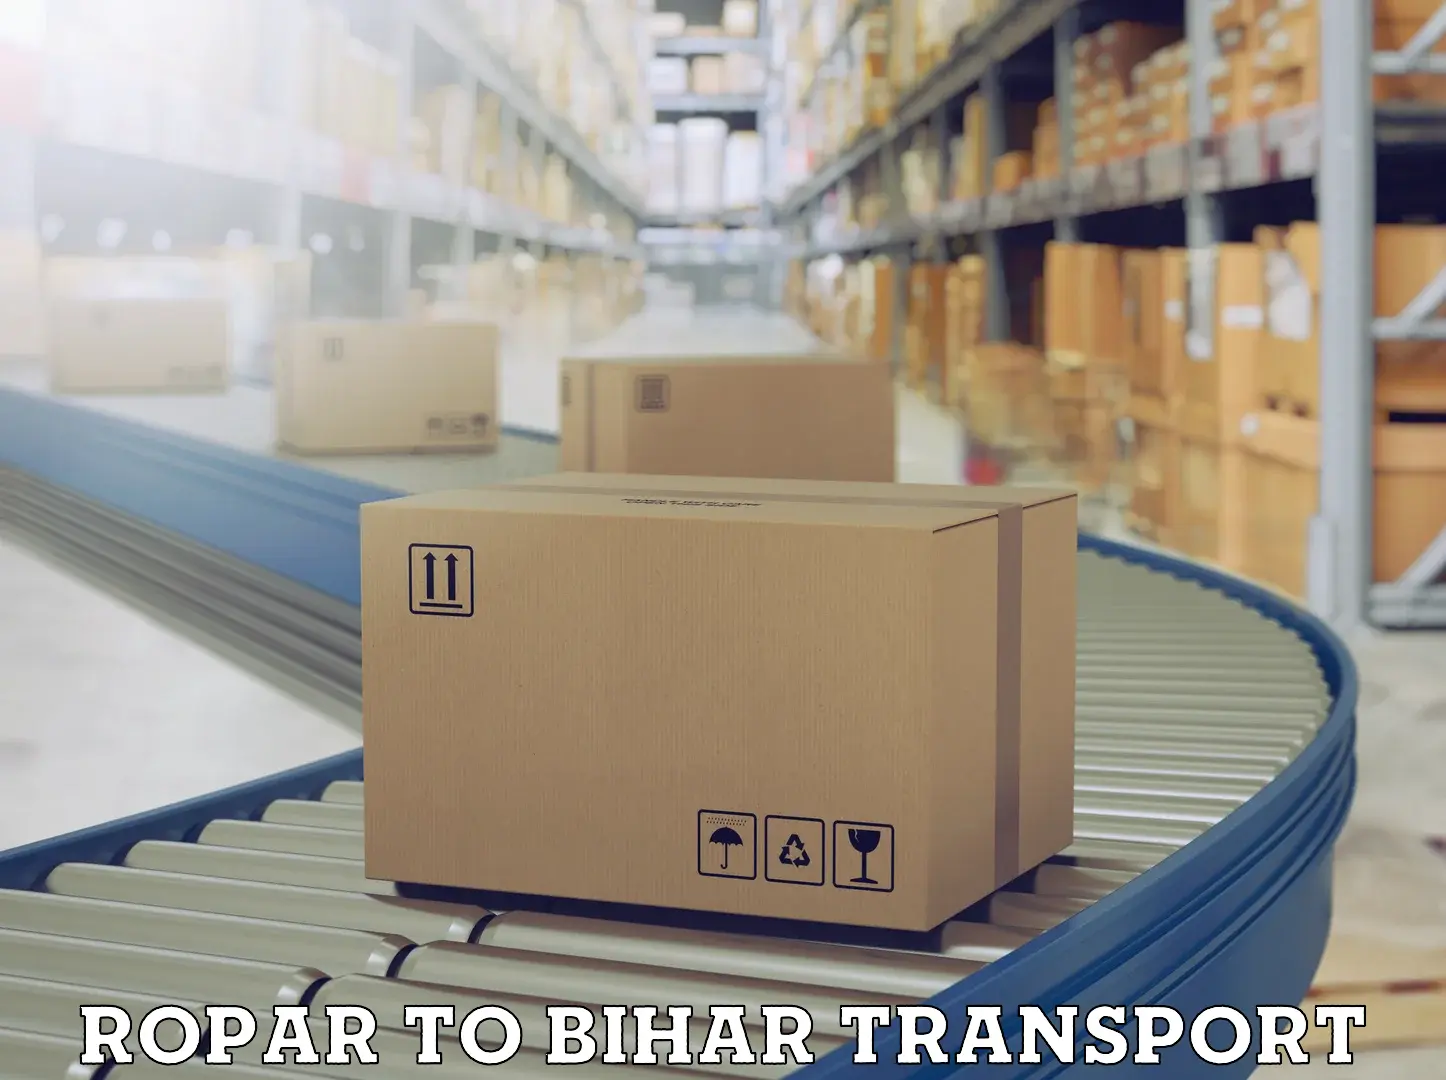 Goods delivery service Ropar to Supaul